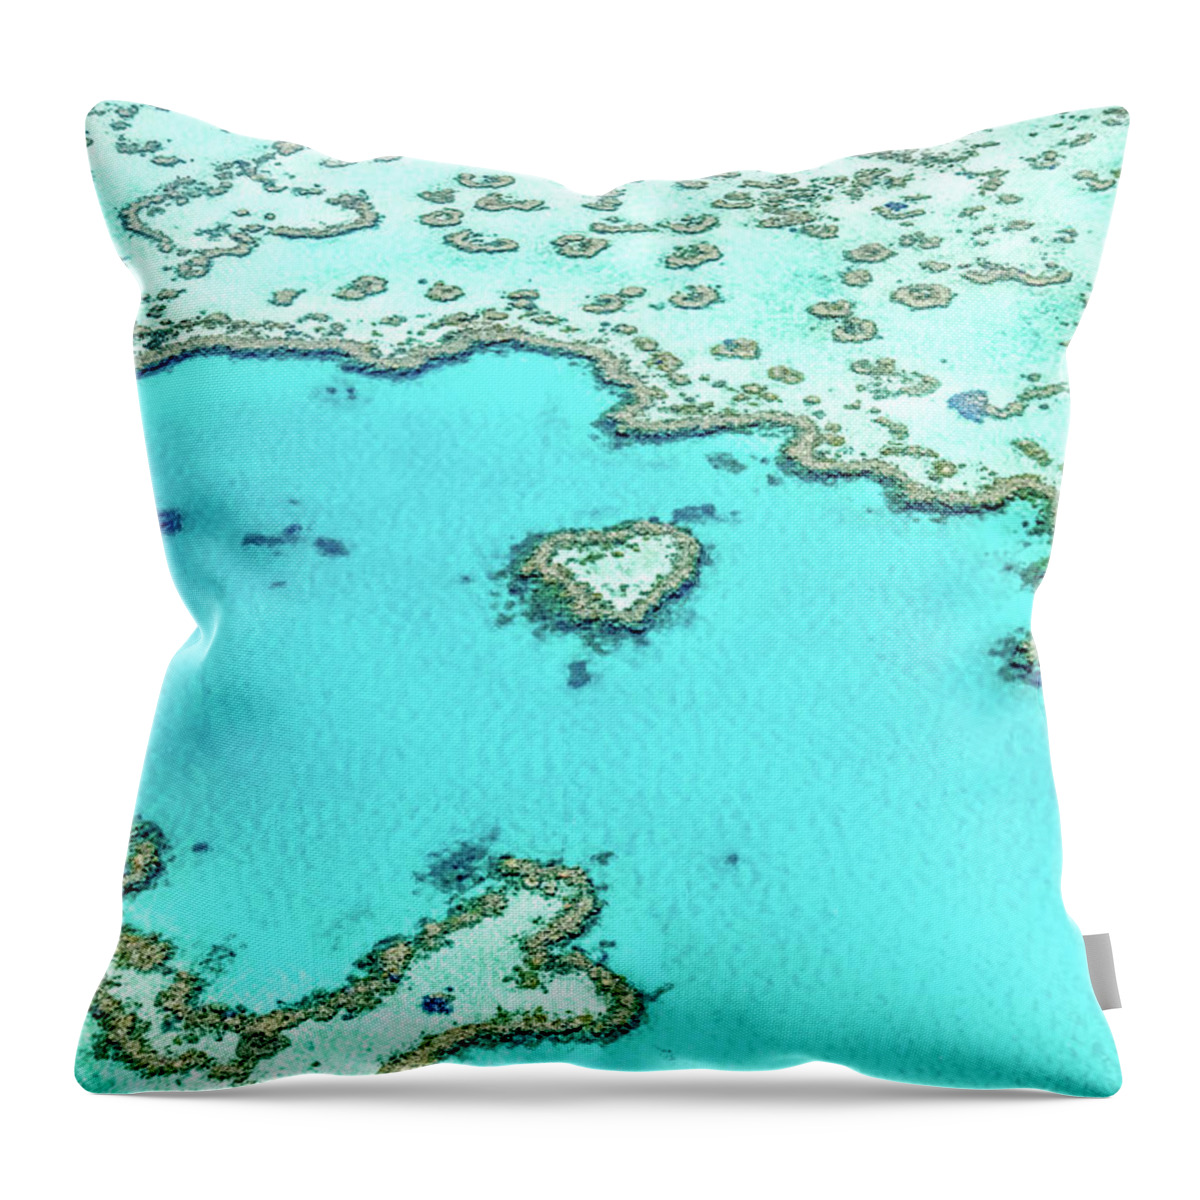 Australia Throw Pillow featuring the photograph Heart Of The Reef by Az Jackson